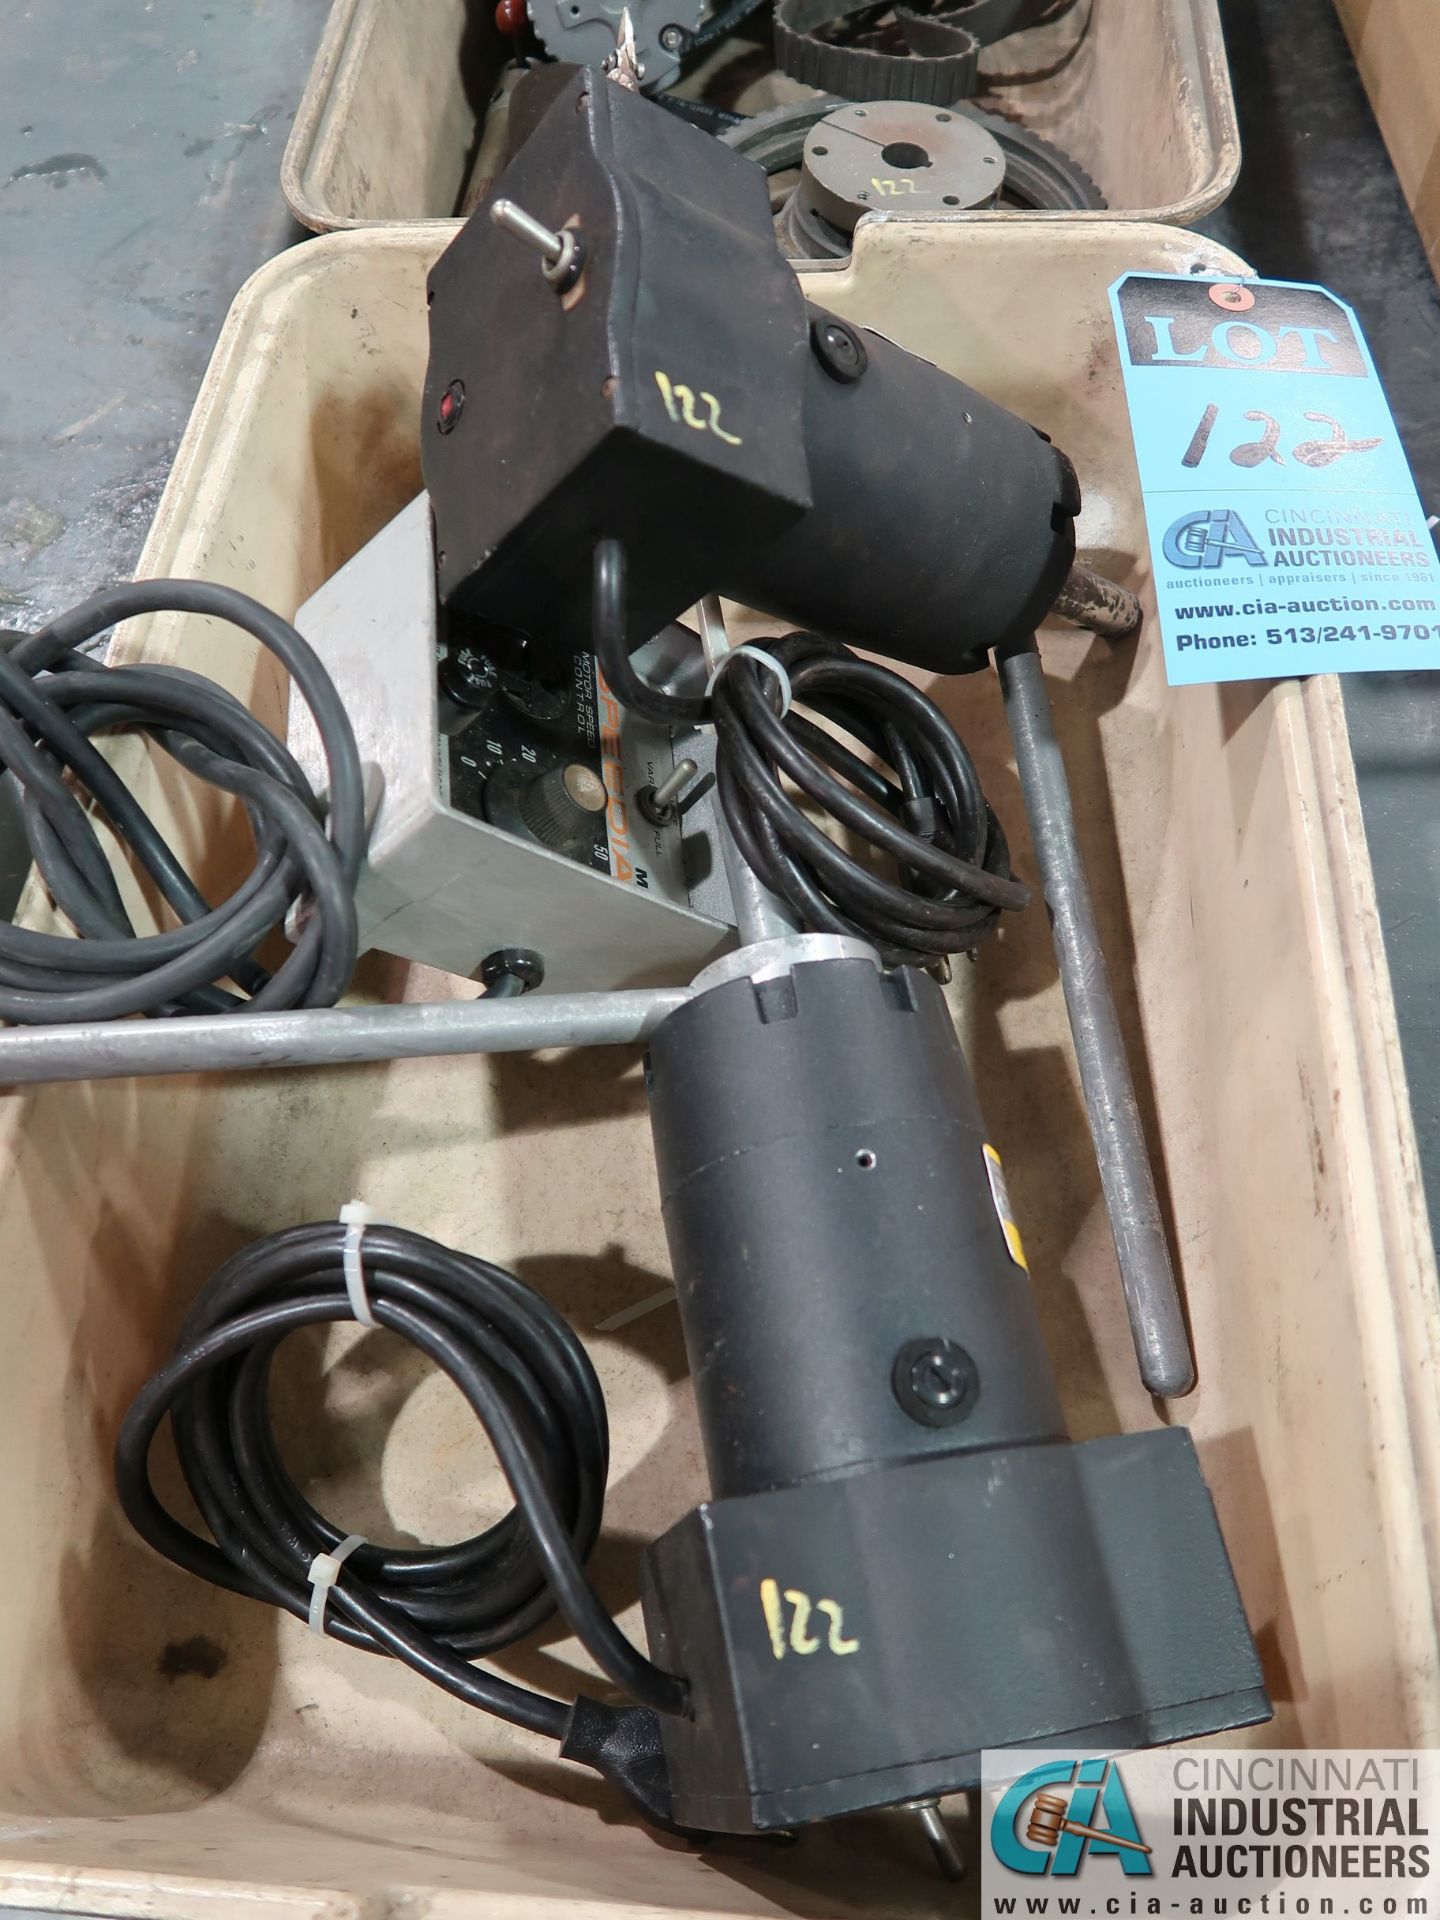 (LOT) (2) ARROW 1750 MIXERS WITH DAYTON AND LUTRON SPEED CONTROLS